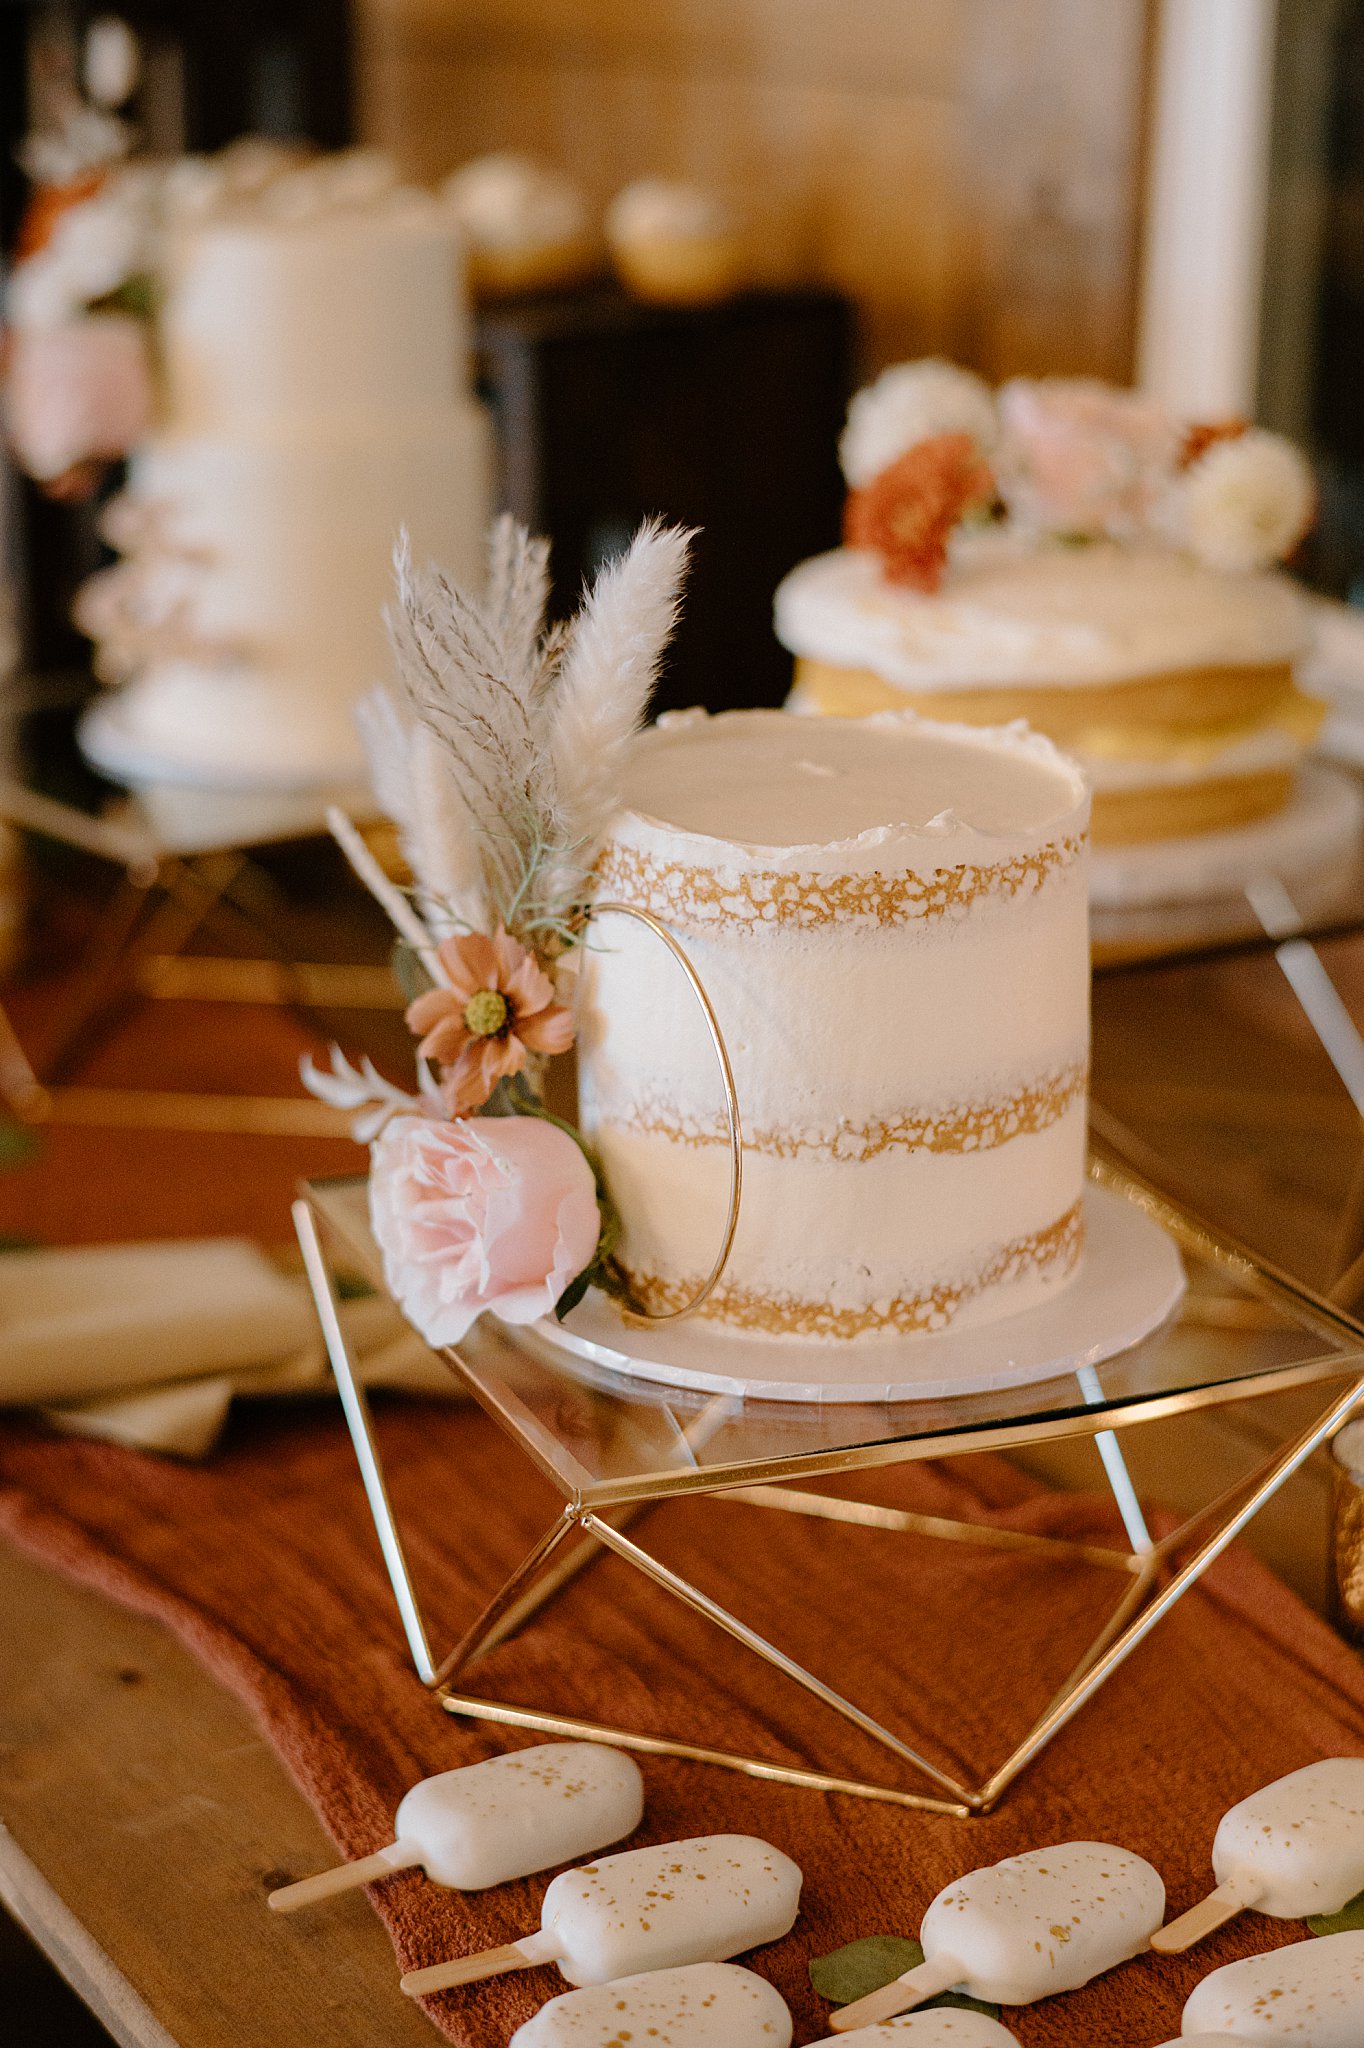 simple cake sits on stand surrounded by cake pops by Midwest wedding photographer